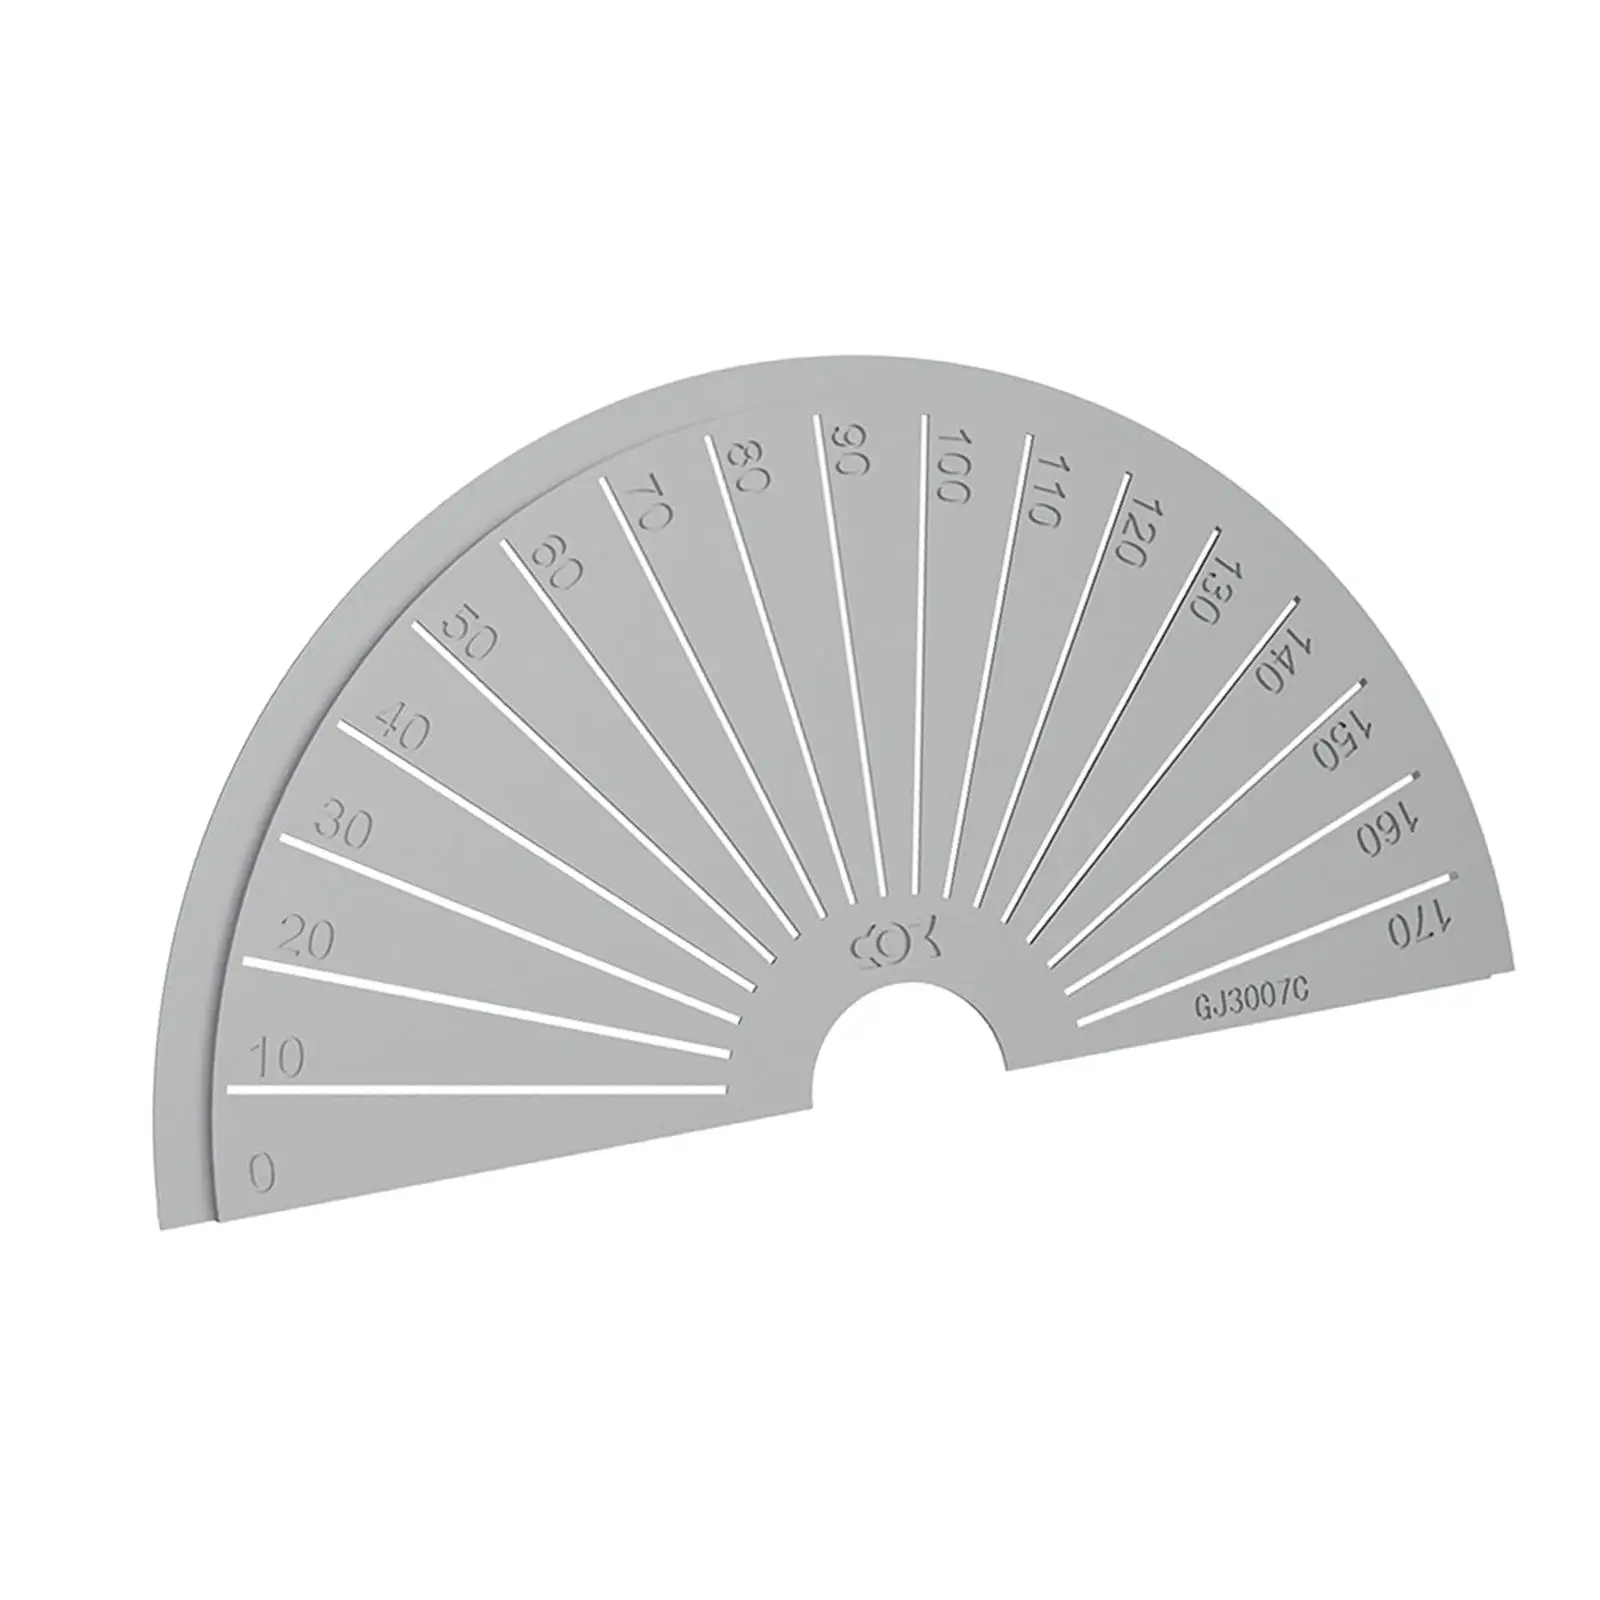 Stainless Steel Protractor Model Parts Universal 3.15`` Measuring Round Head Protractor for Drawing Model Prop Angle Measurement